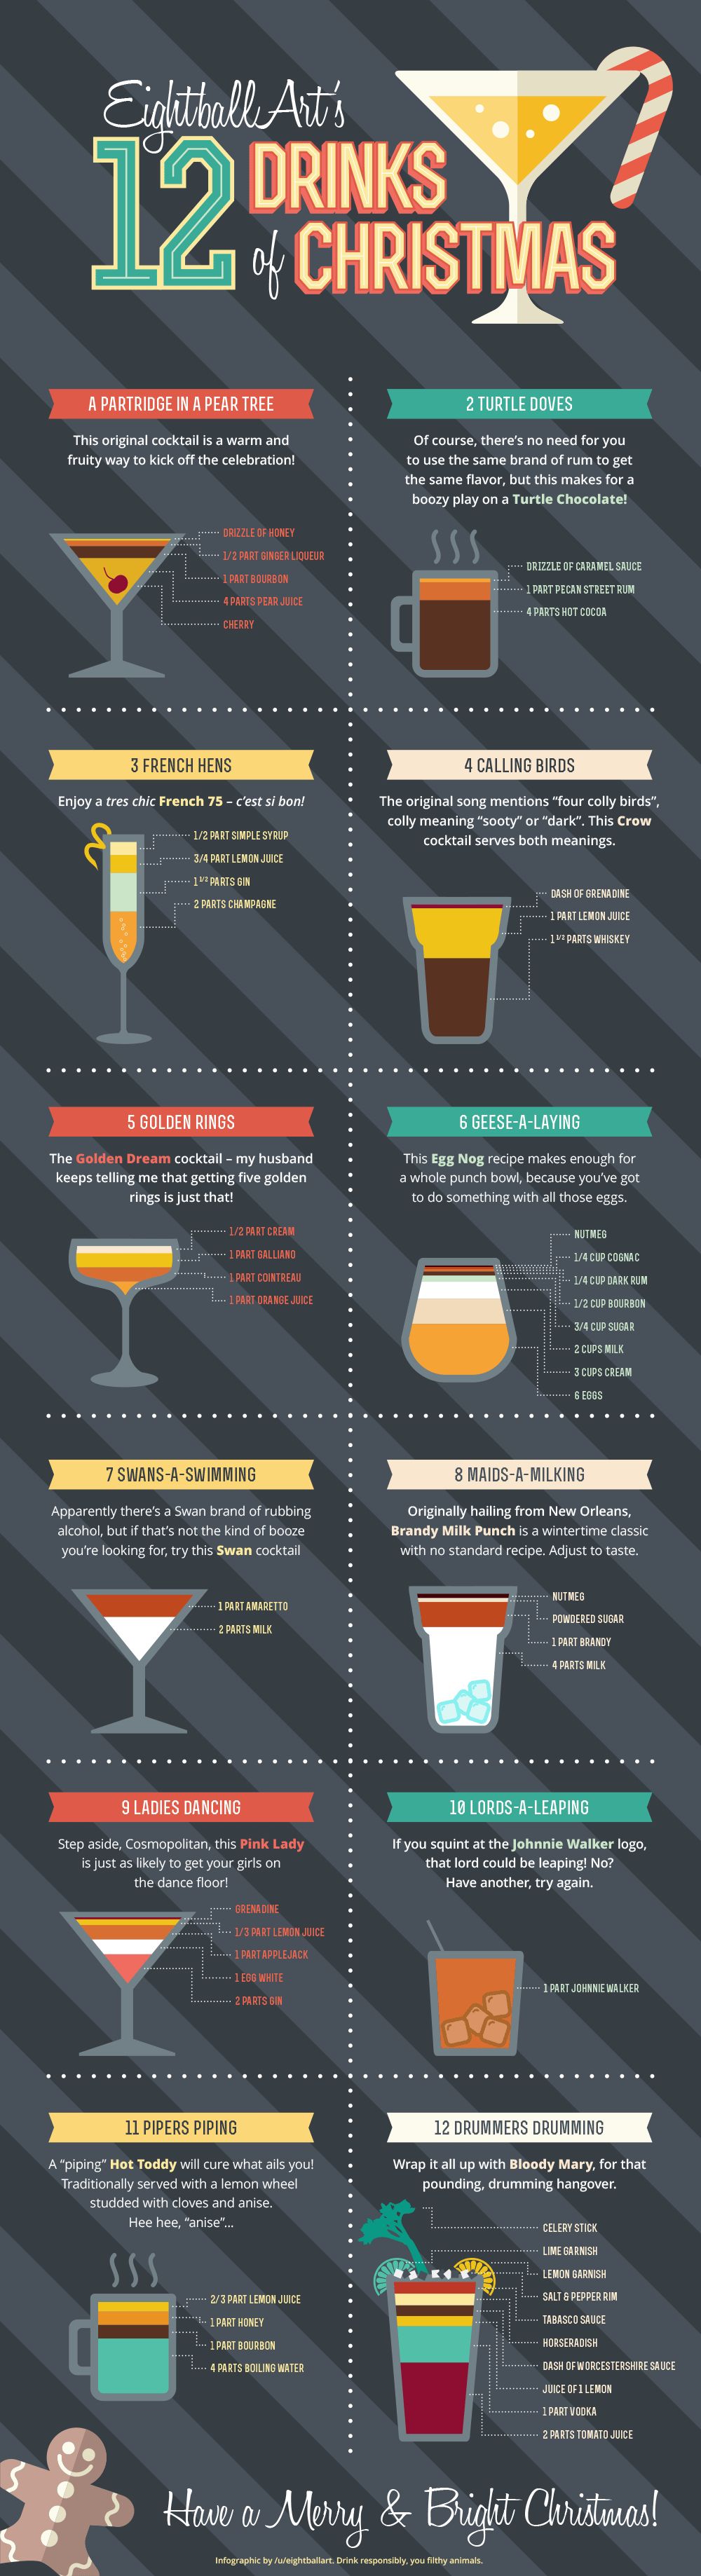 12 Drinks Of Christmas Infographic